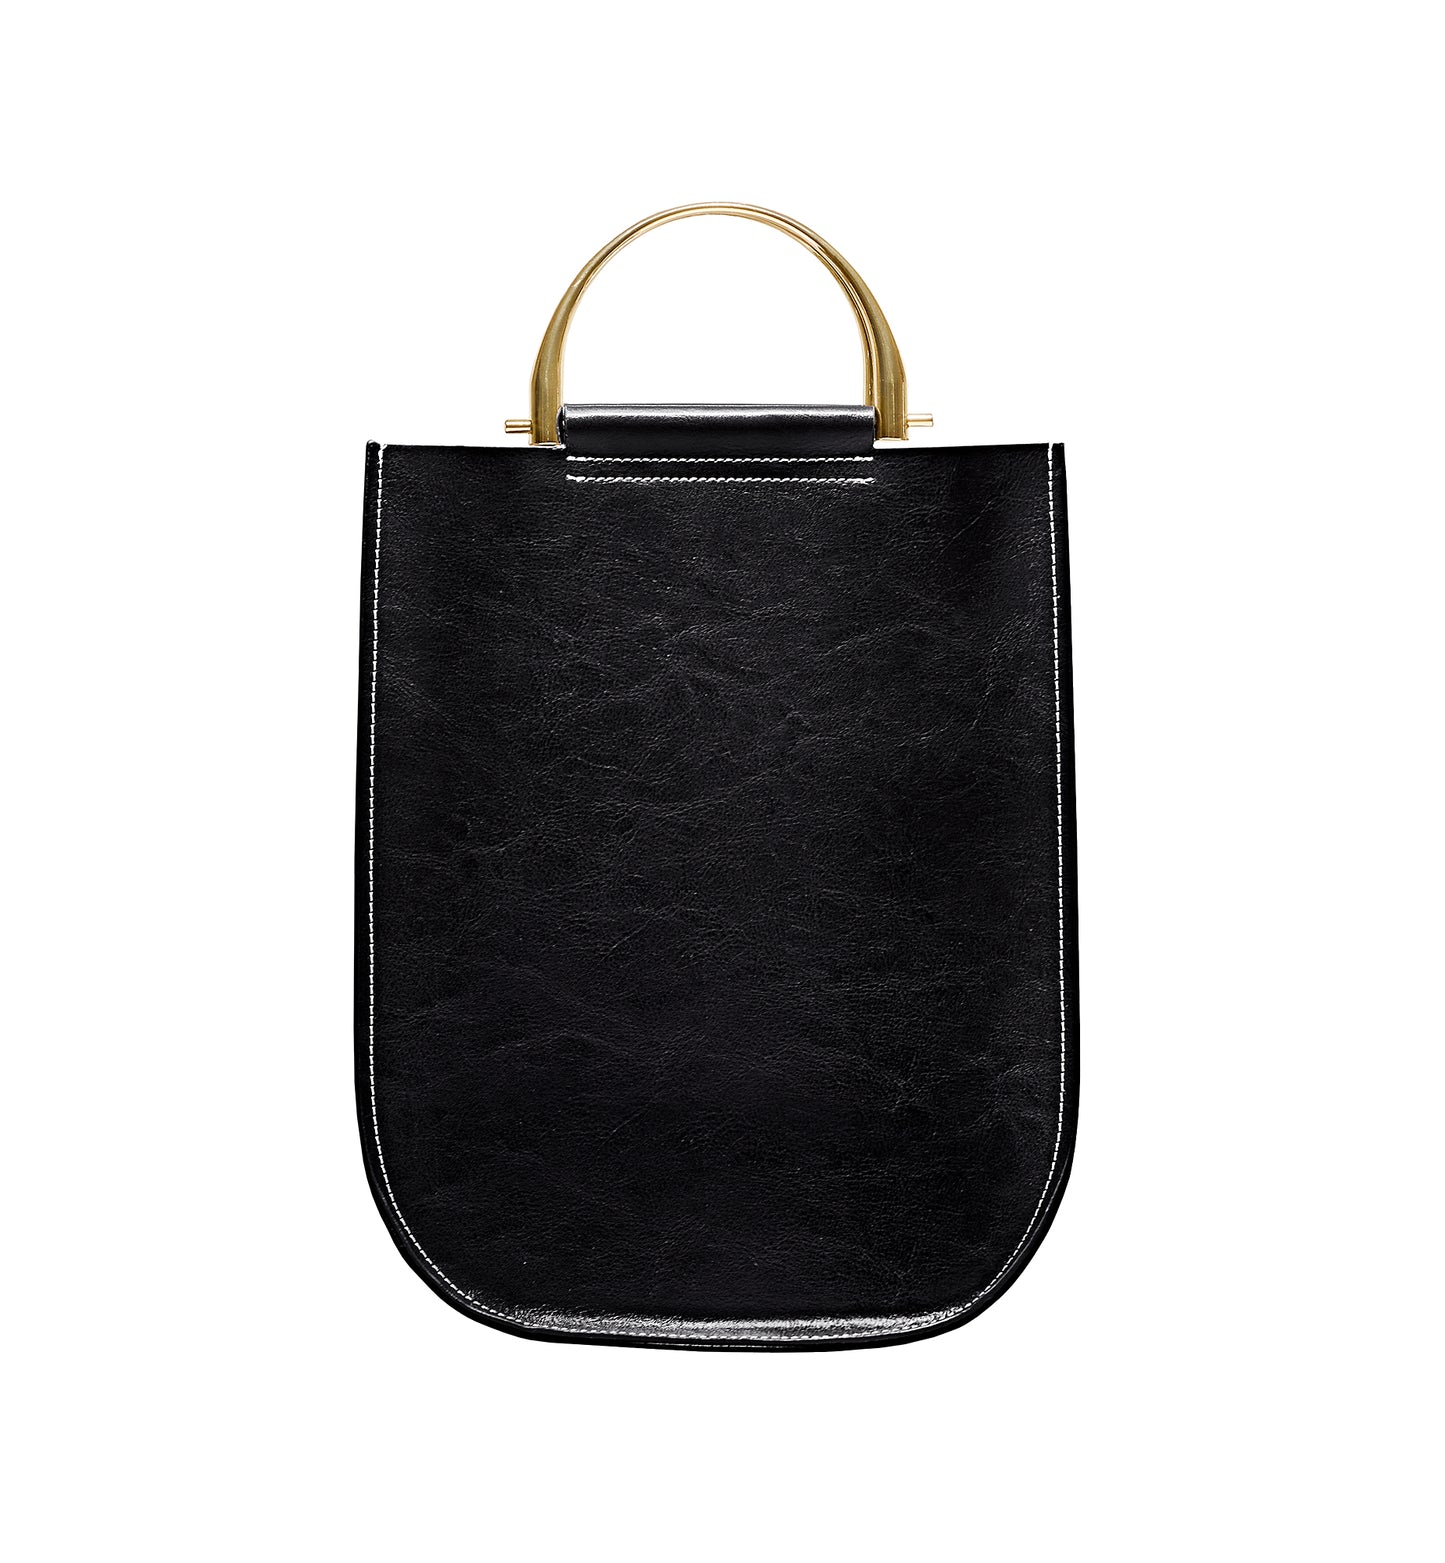 Soft Leather Tote in Sleek Black-Gold Handle